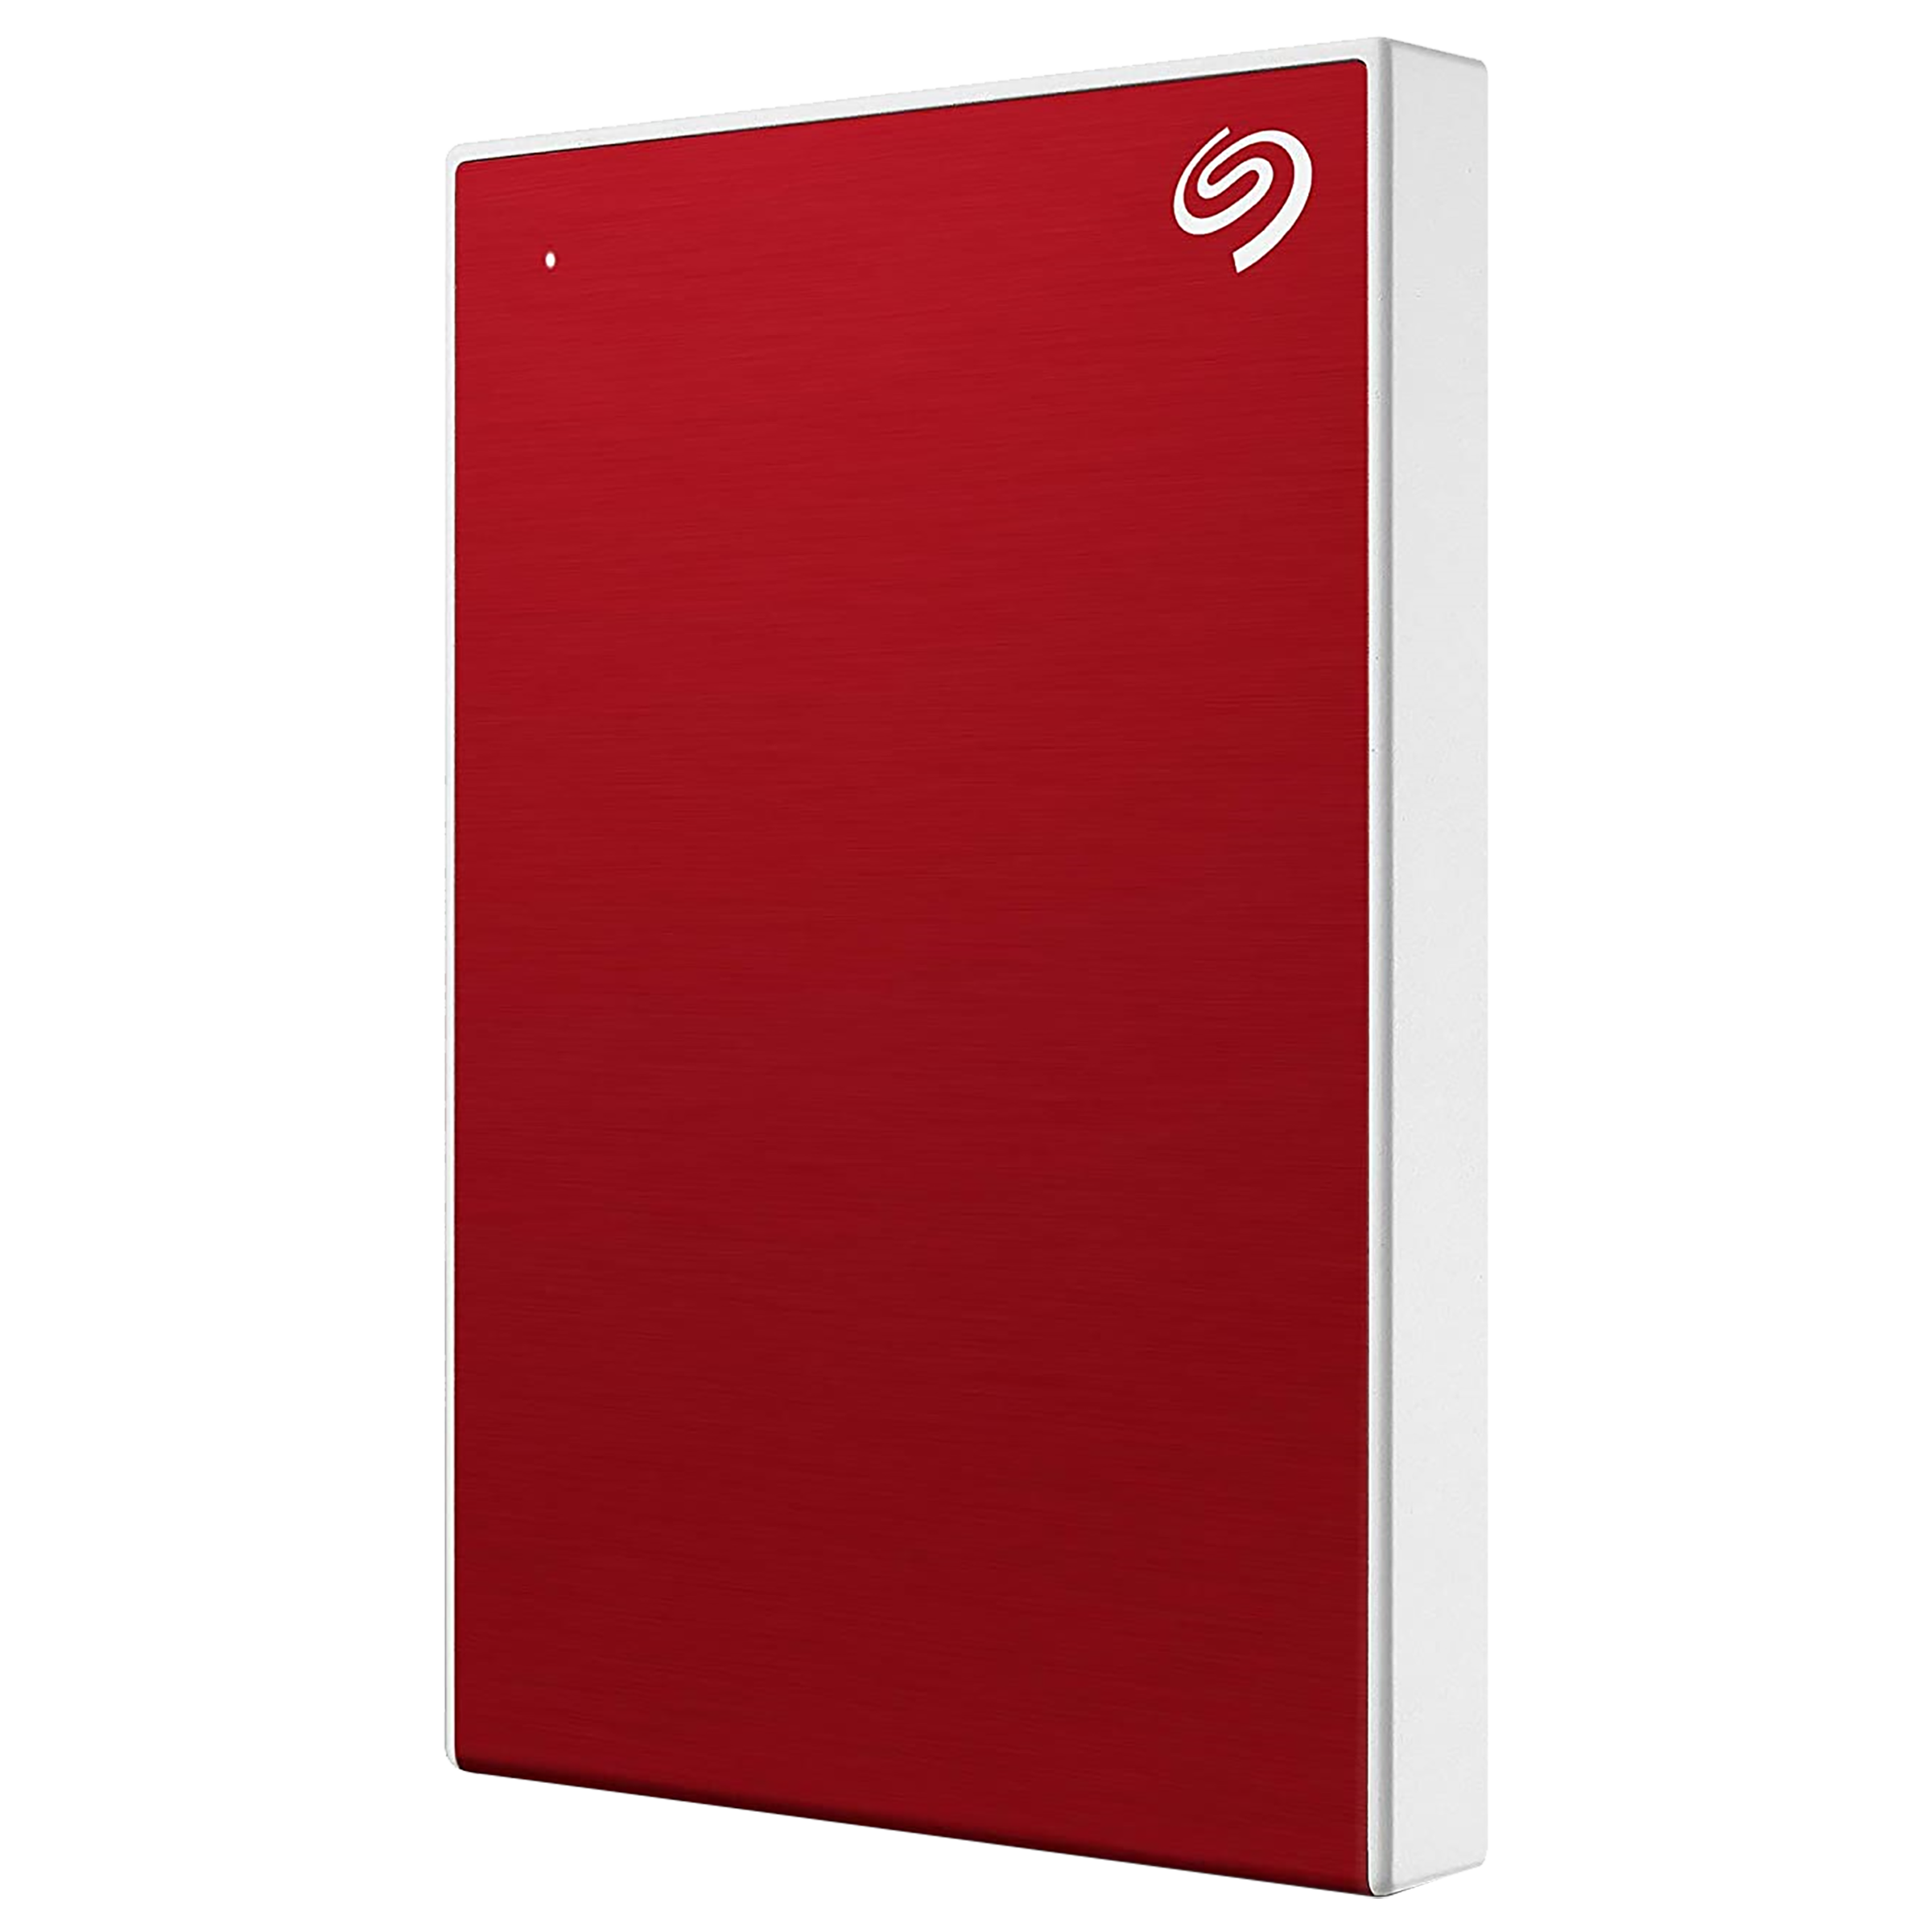 Seagate One Touch 2TB USB 3.0 Hard Disk Drive (Advanced Password Protection, STKY2000403, Red)_1